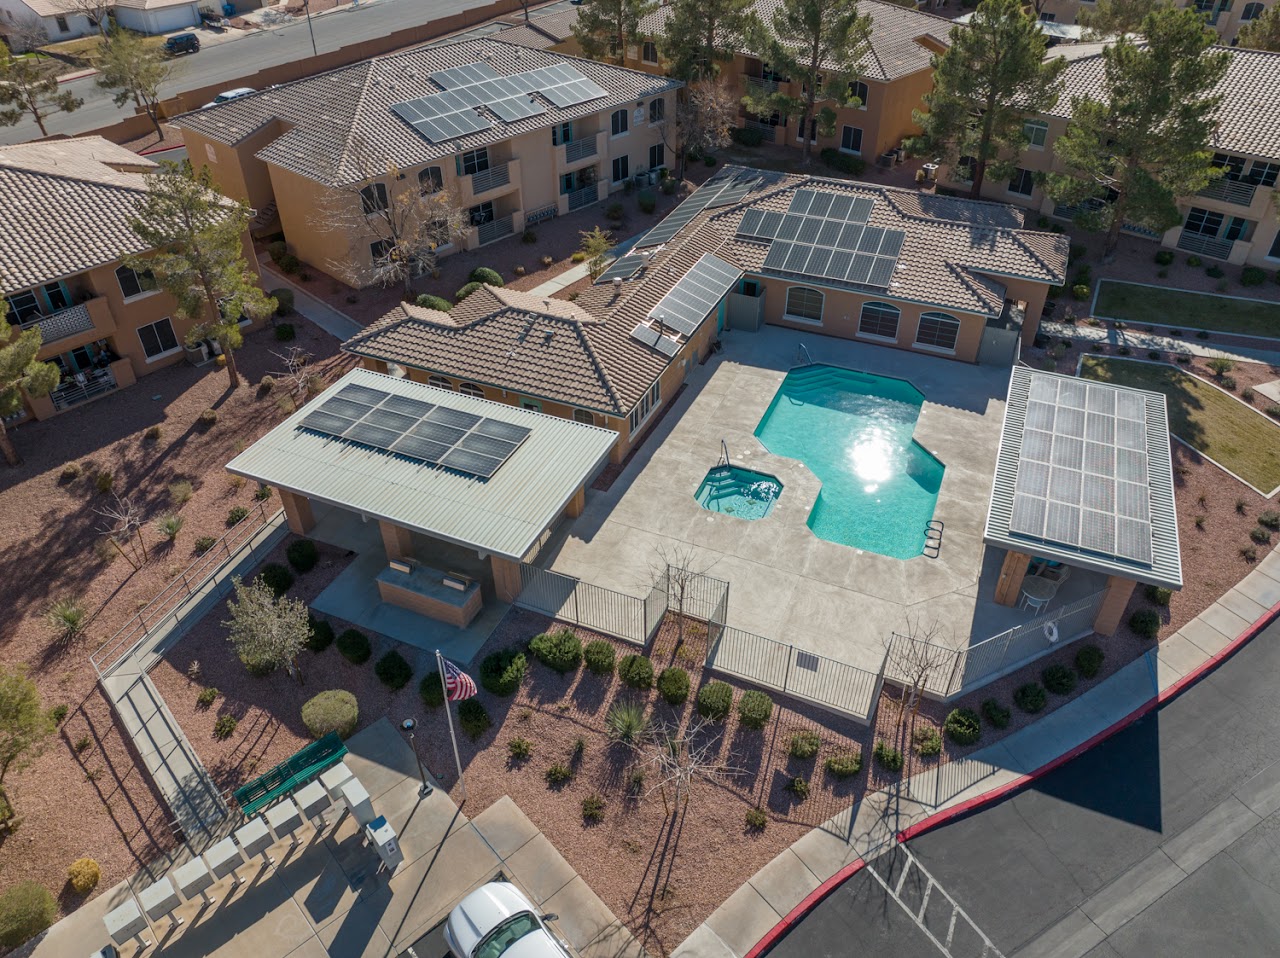 Photo of CAPISTRANO PINES APTS.. Affordable housing located at 400 N. MAJOR AVE. HENDERSON, NV 89015